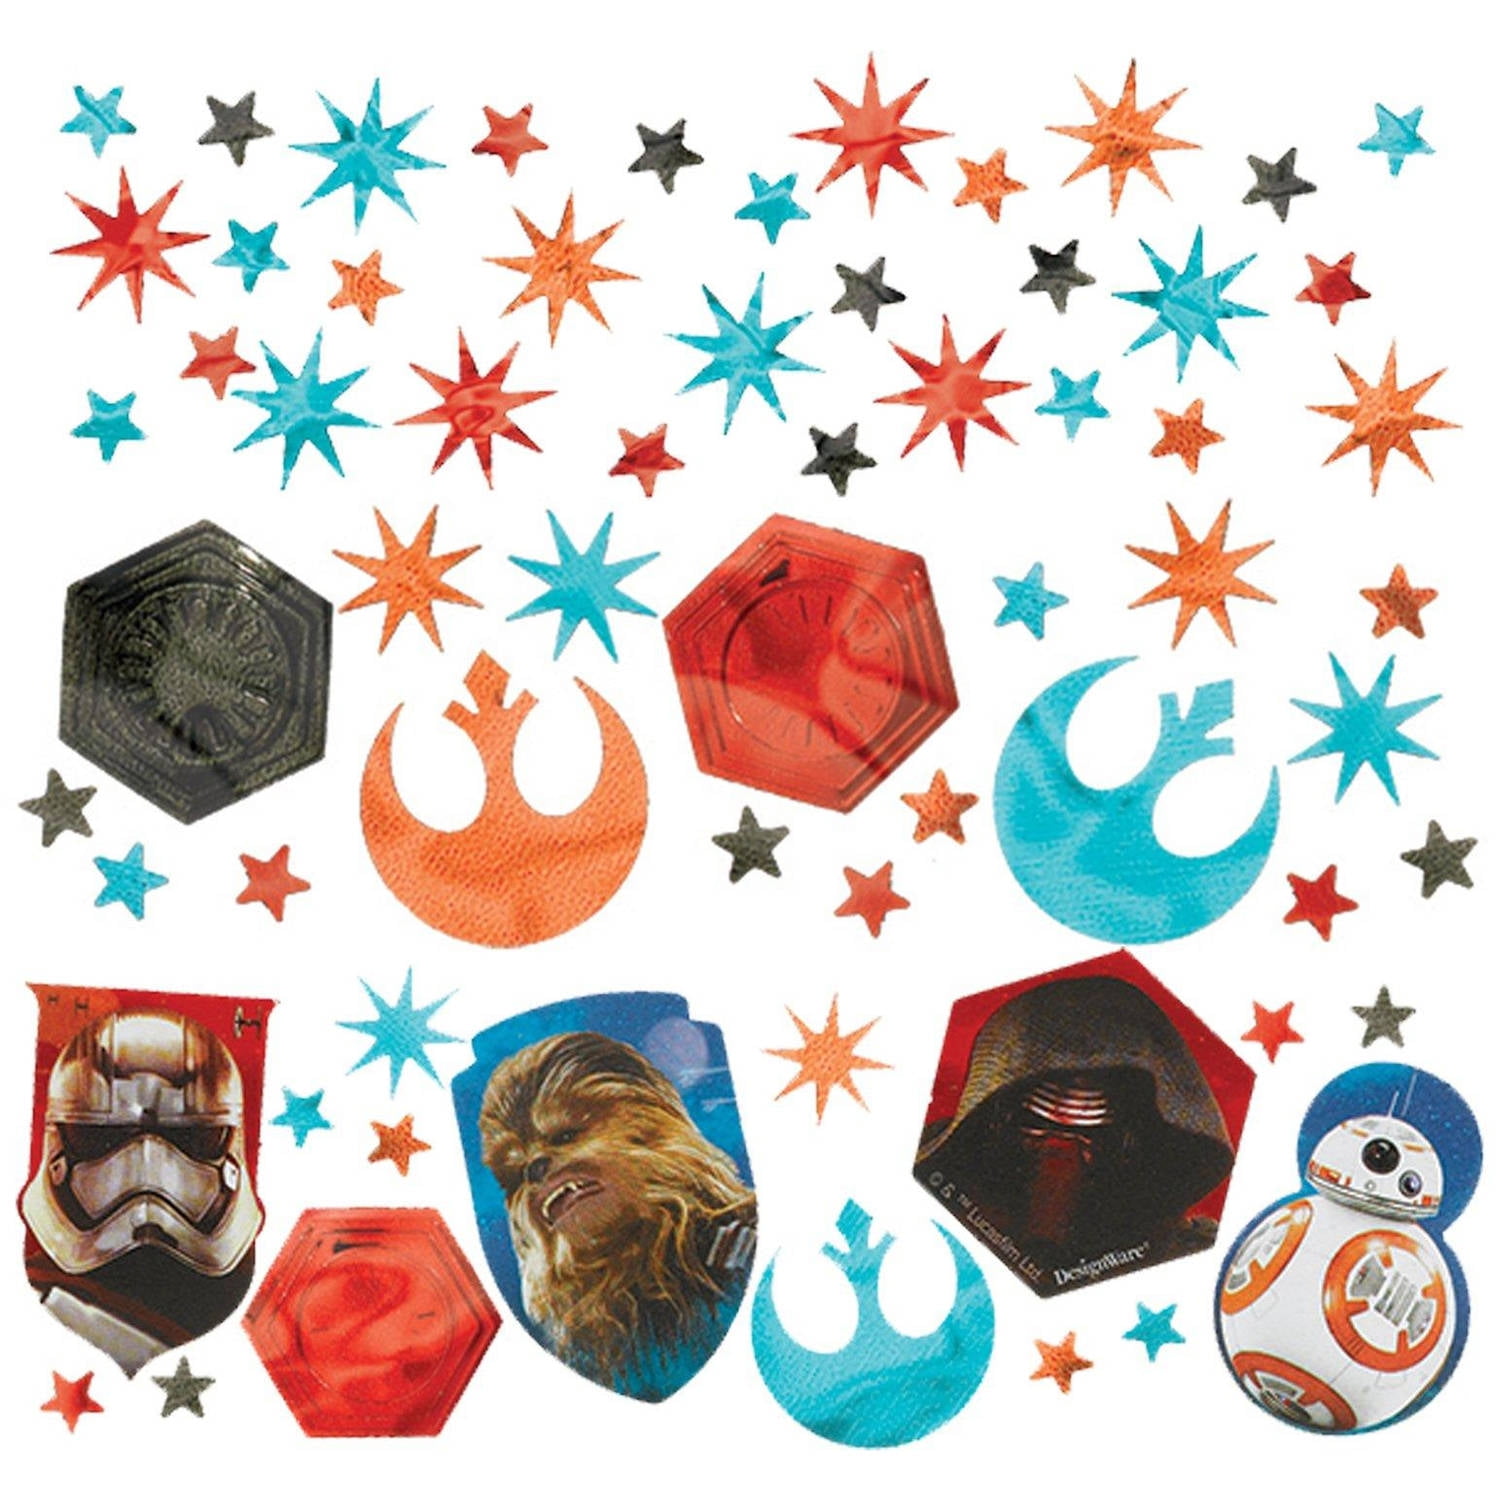 STAR WARS Force Awakens PARTY GAME POSTER ~ Birthday Supplies Decorations VII 